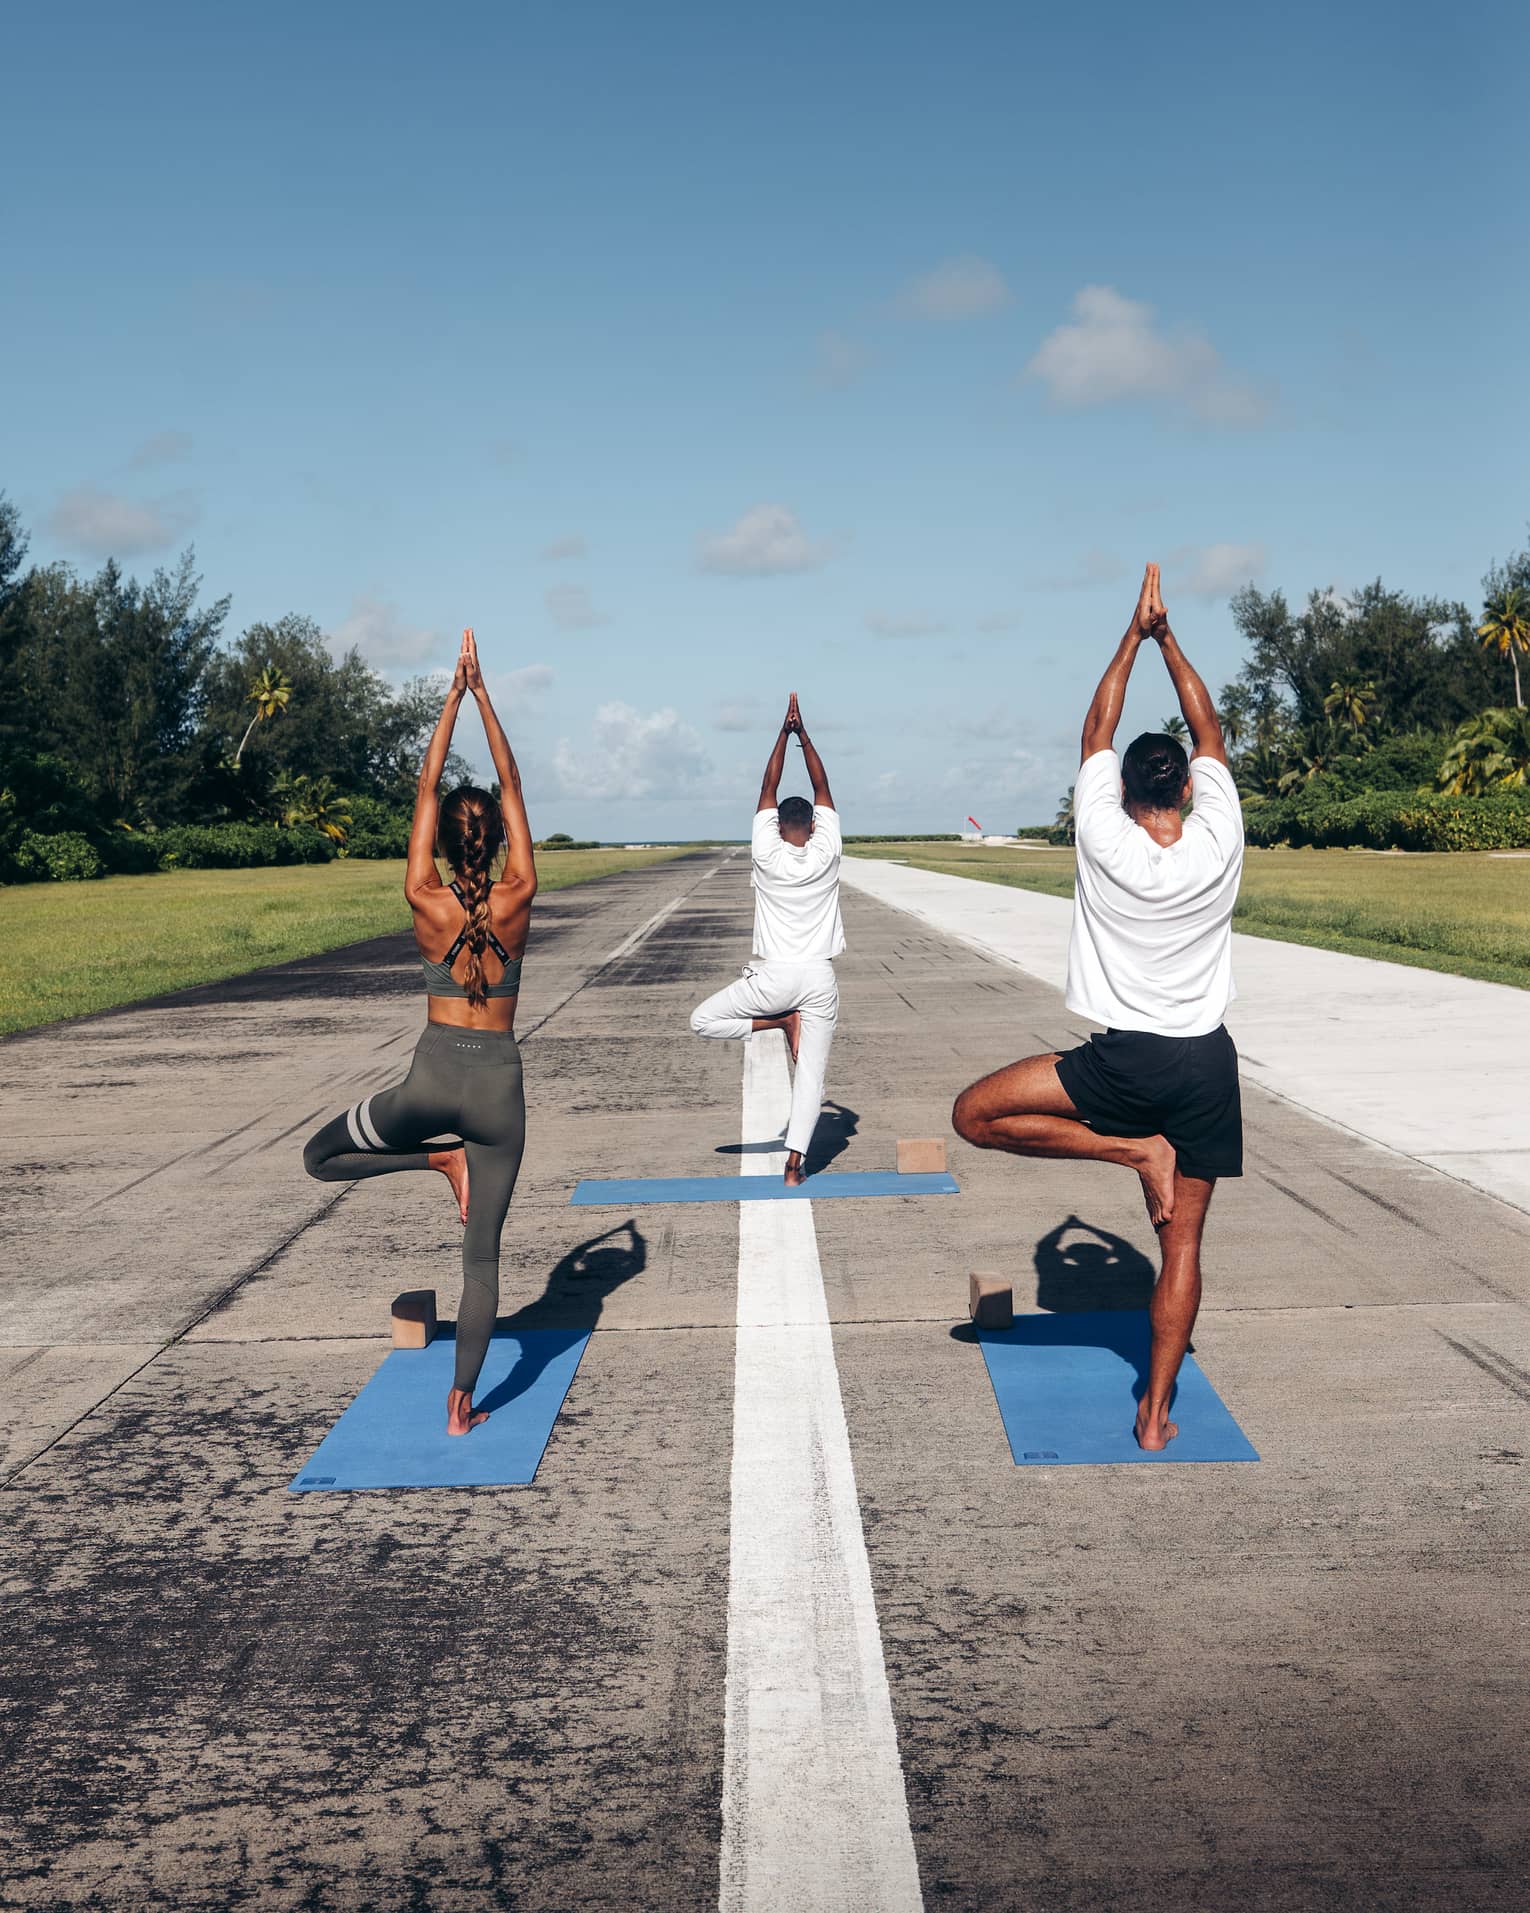 Rear view of three people practicing yoga in tree pose on an airport runway framed by lush greenery, under a clear blue sky.